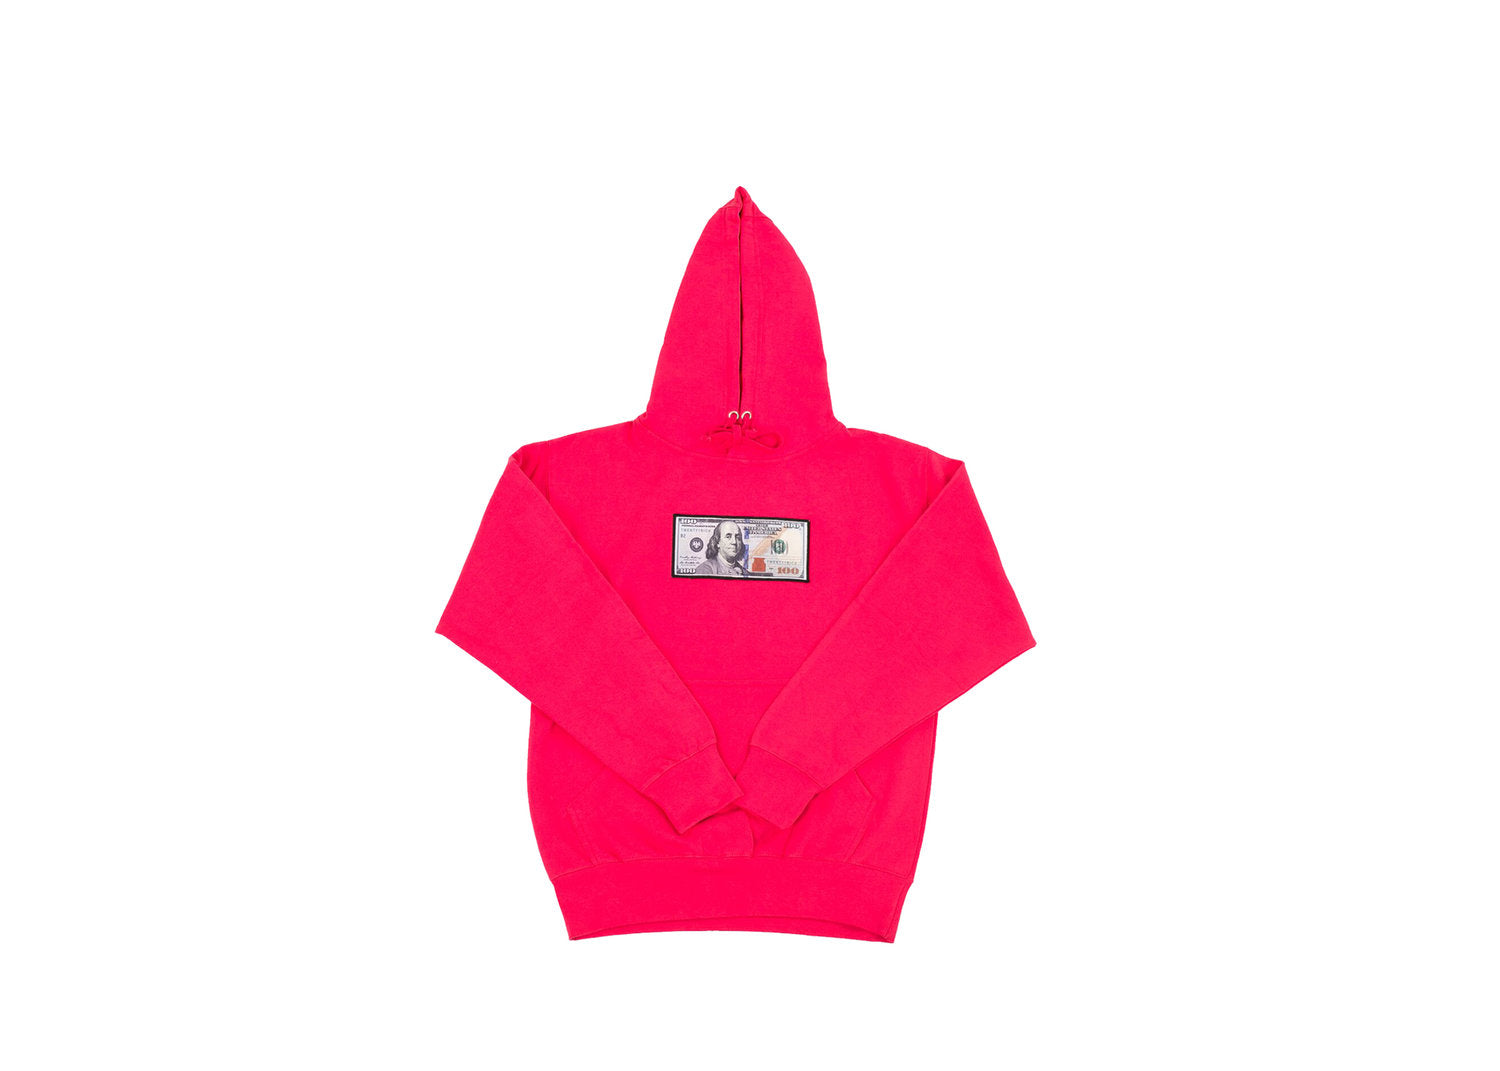 Hot Pink Blue Hundreds Hoodie by Twenty1Rich with a $100 Blue Hundred Dollar Bill logo, Front Kangaroo Pocket, Cotton, Polyester, and Drawstring Hood